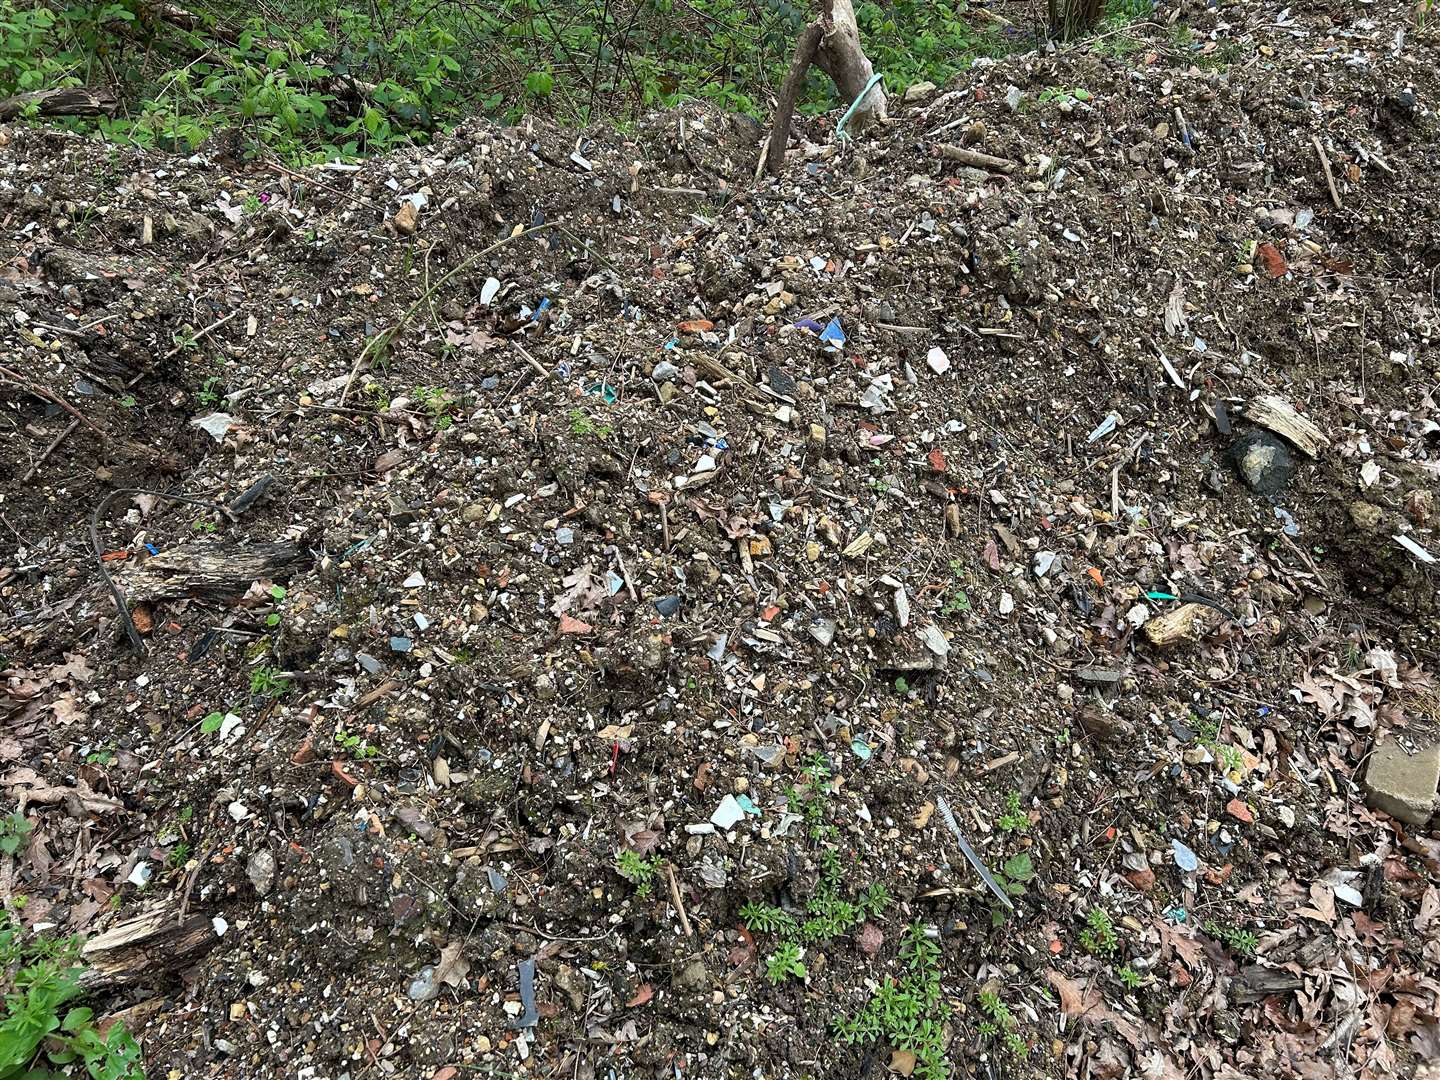 The illegal dumping in Hoad's Wood, Ashford, has caused the site to smell like rotting eggs